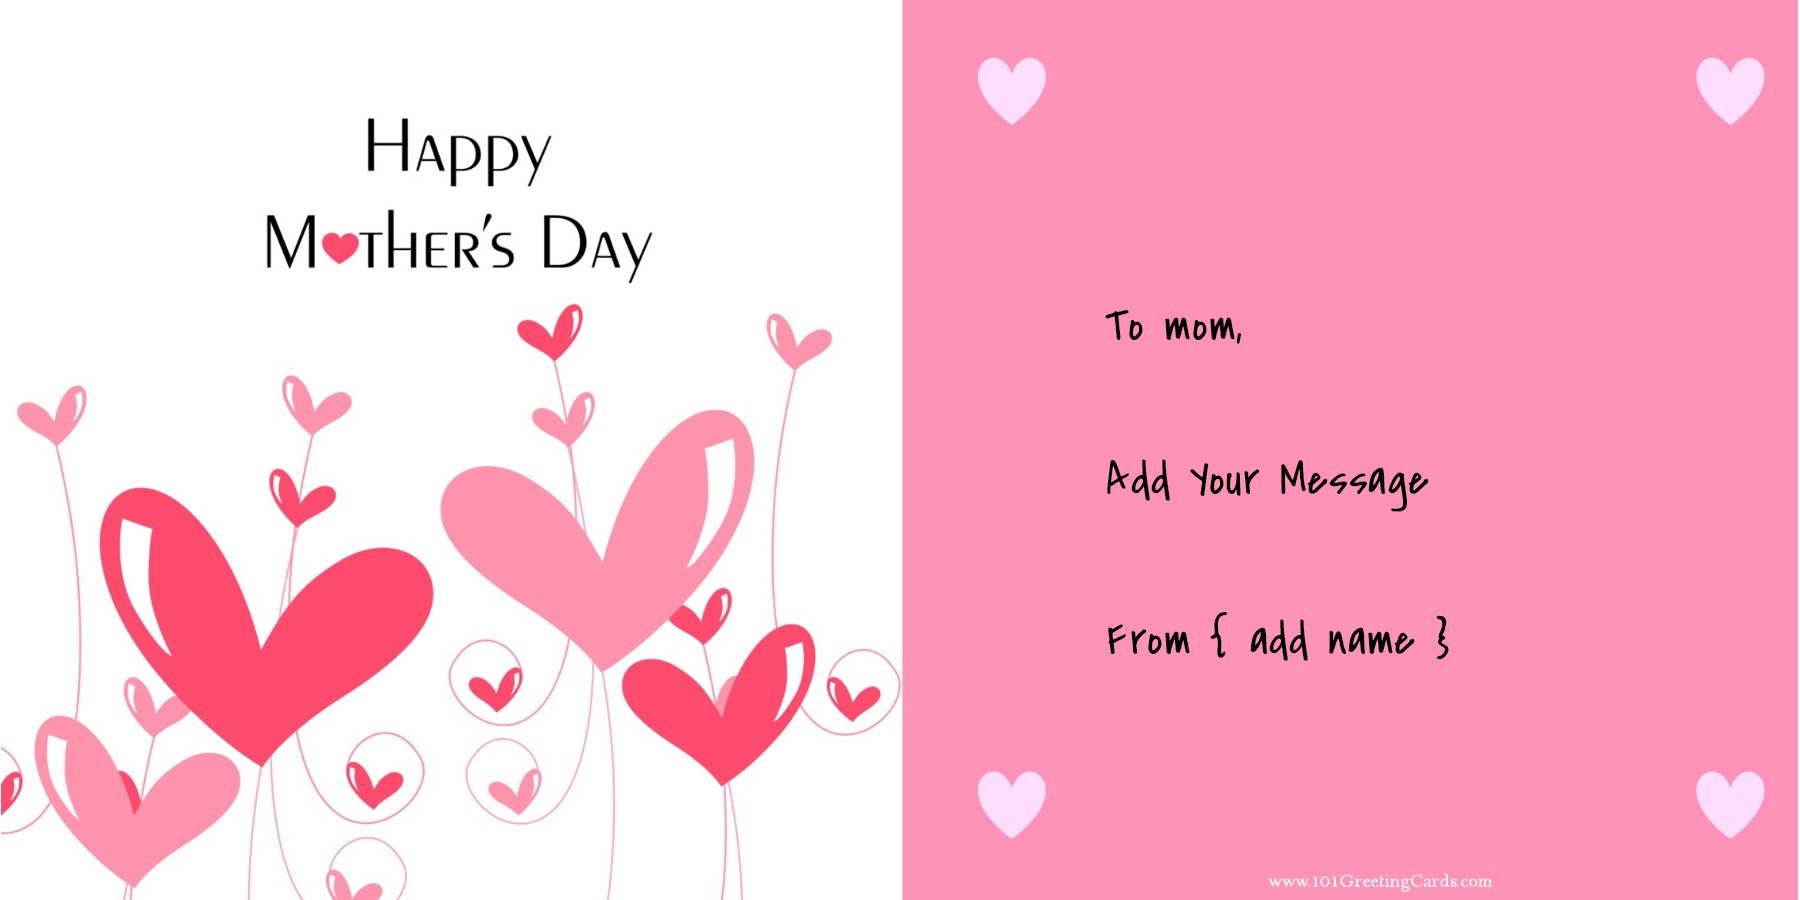 clipart mother day cards - photo #33